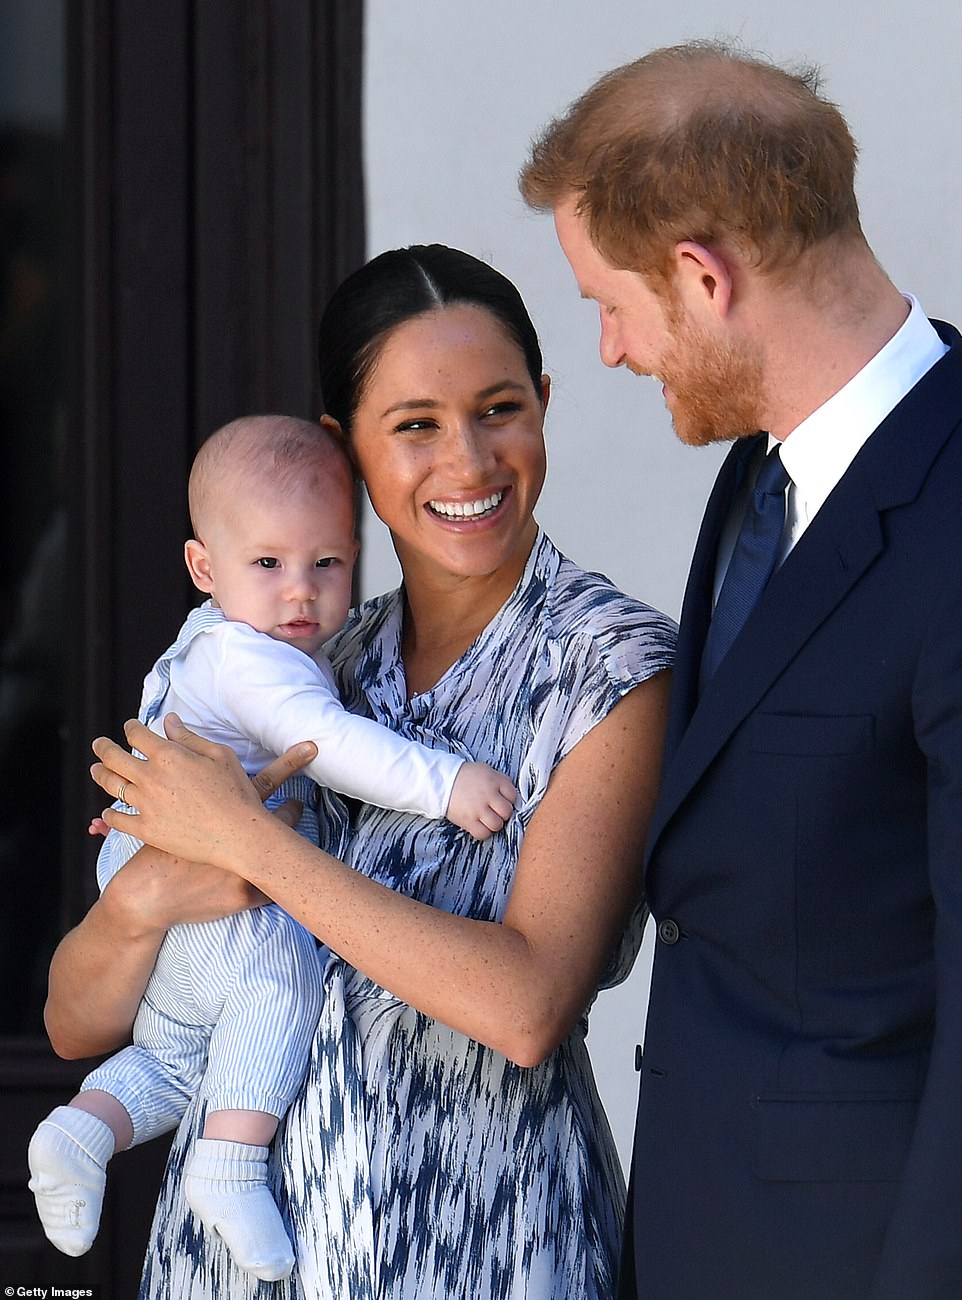 The Duke and Duchess told the Nobel laureate that they had been enjoying 'a lot of good family time', with Meghan saying they felt 'grateful' to spend time with their son to witness moments they 'otherwise might have missed out on' in the absence of Covid (pictured, with their son Archie)